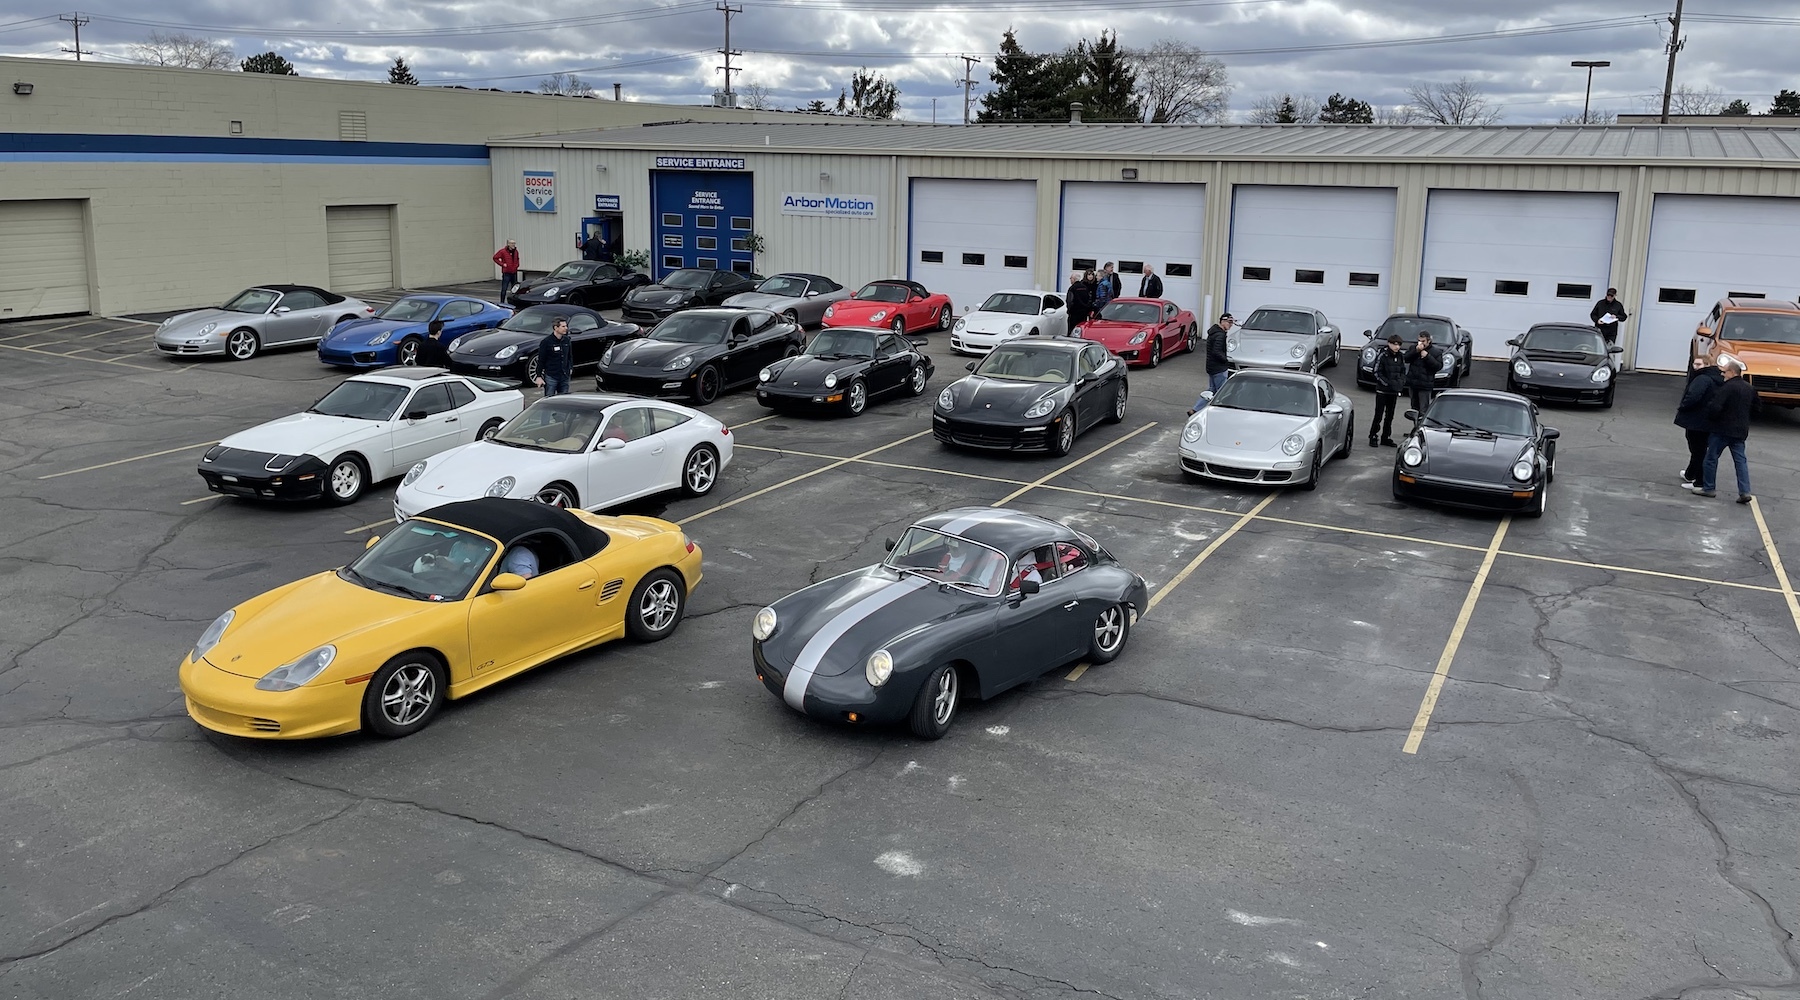 Get your Porsche fixed at ArborMotion!